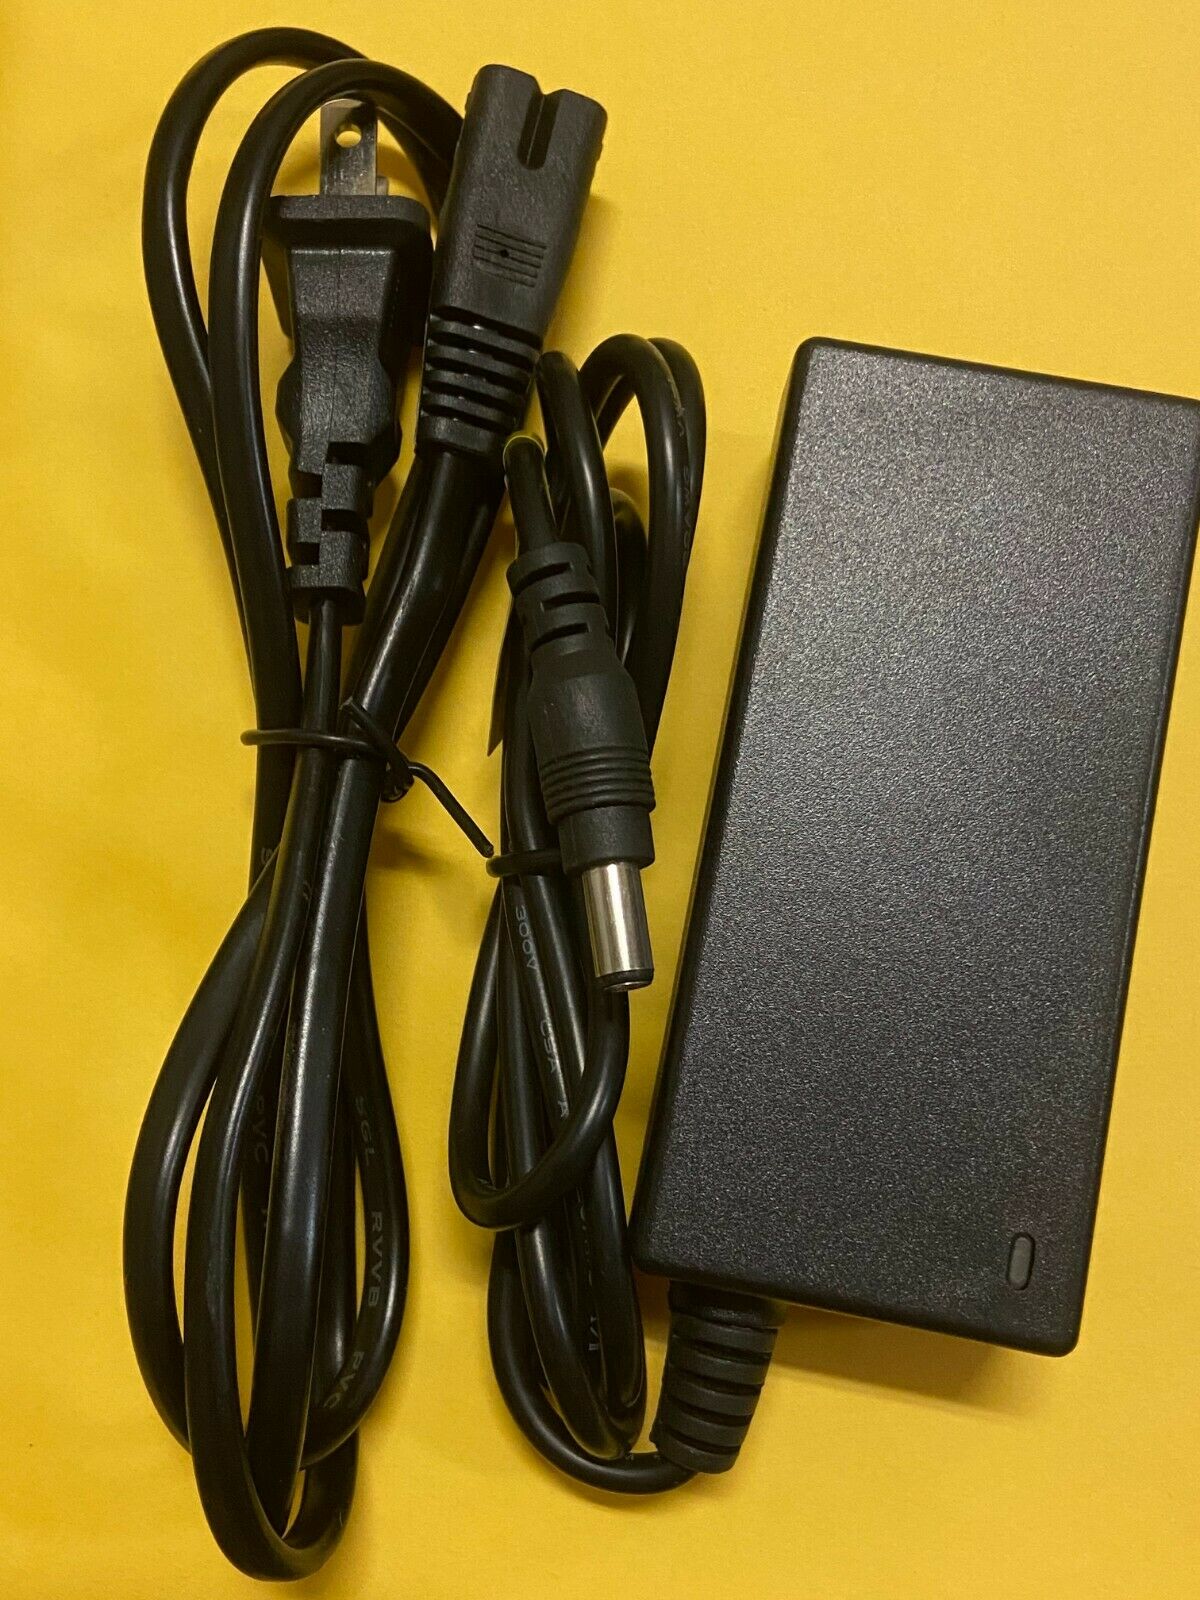 NEW AC/DC Adapter For rbd RT24-296005 RT24296005 Recliner Switching Power Supply NEW AC/DC Adapter For rbd RT24-296005